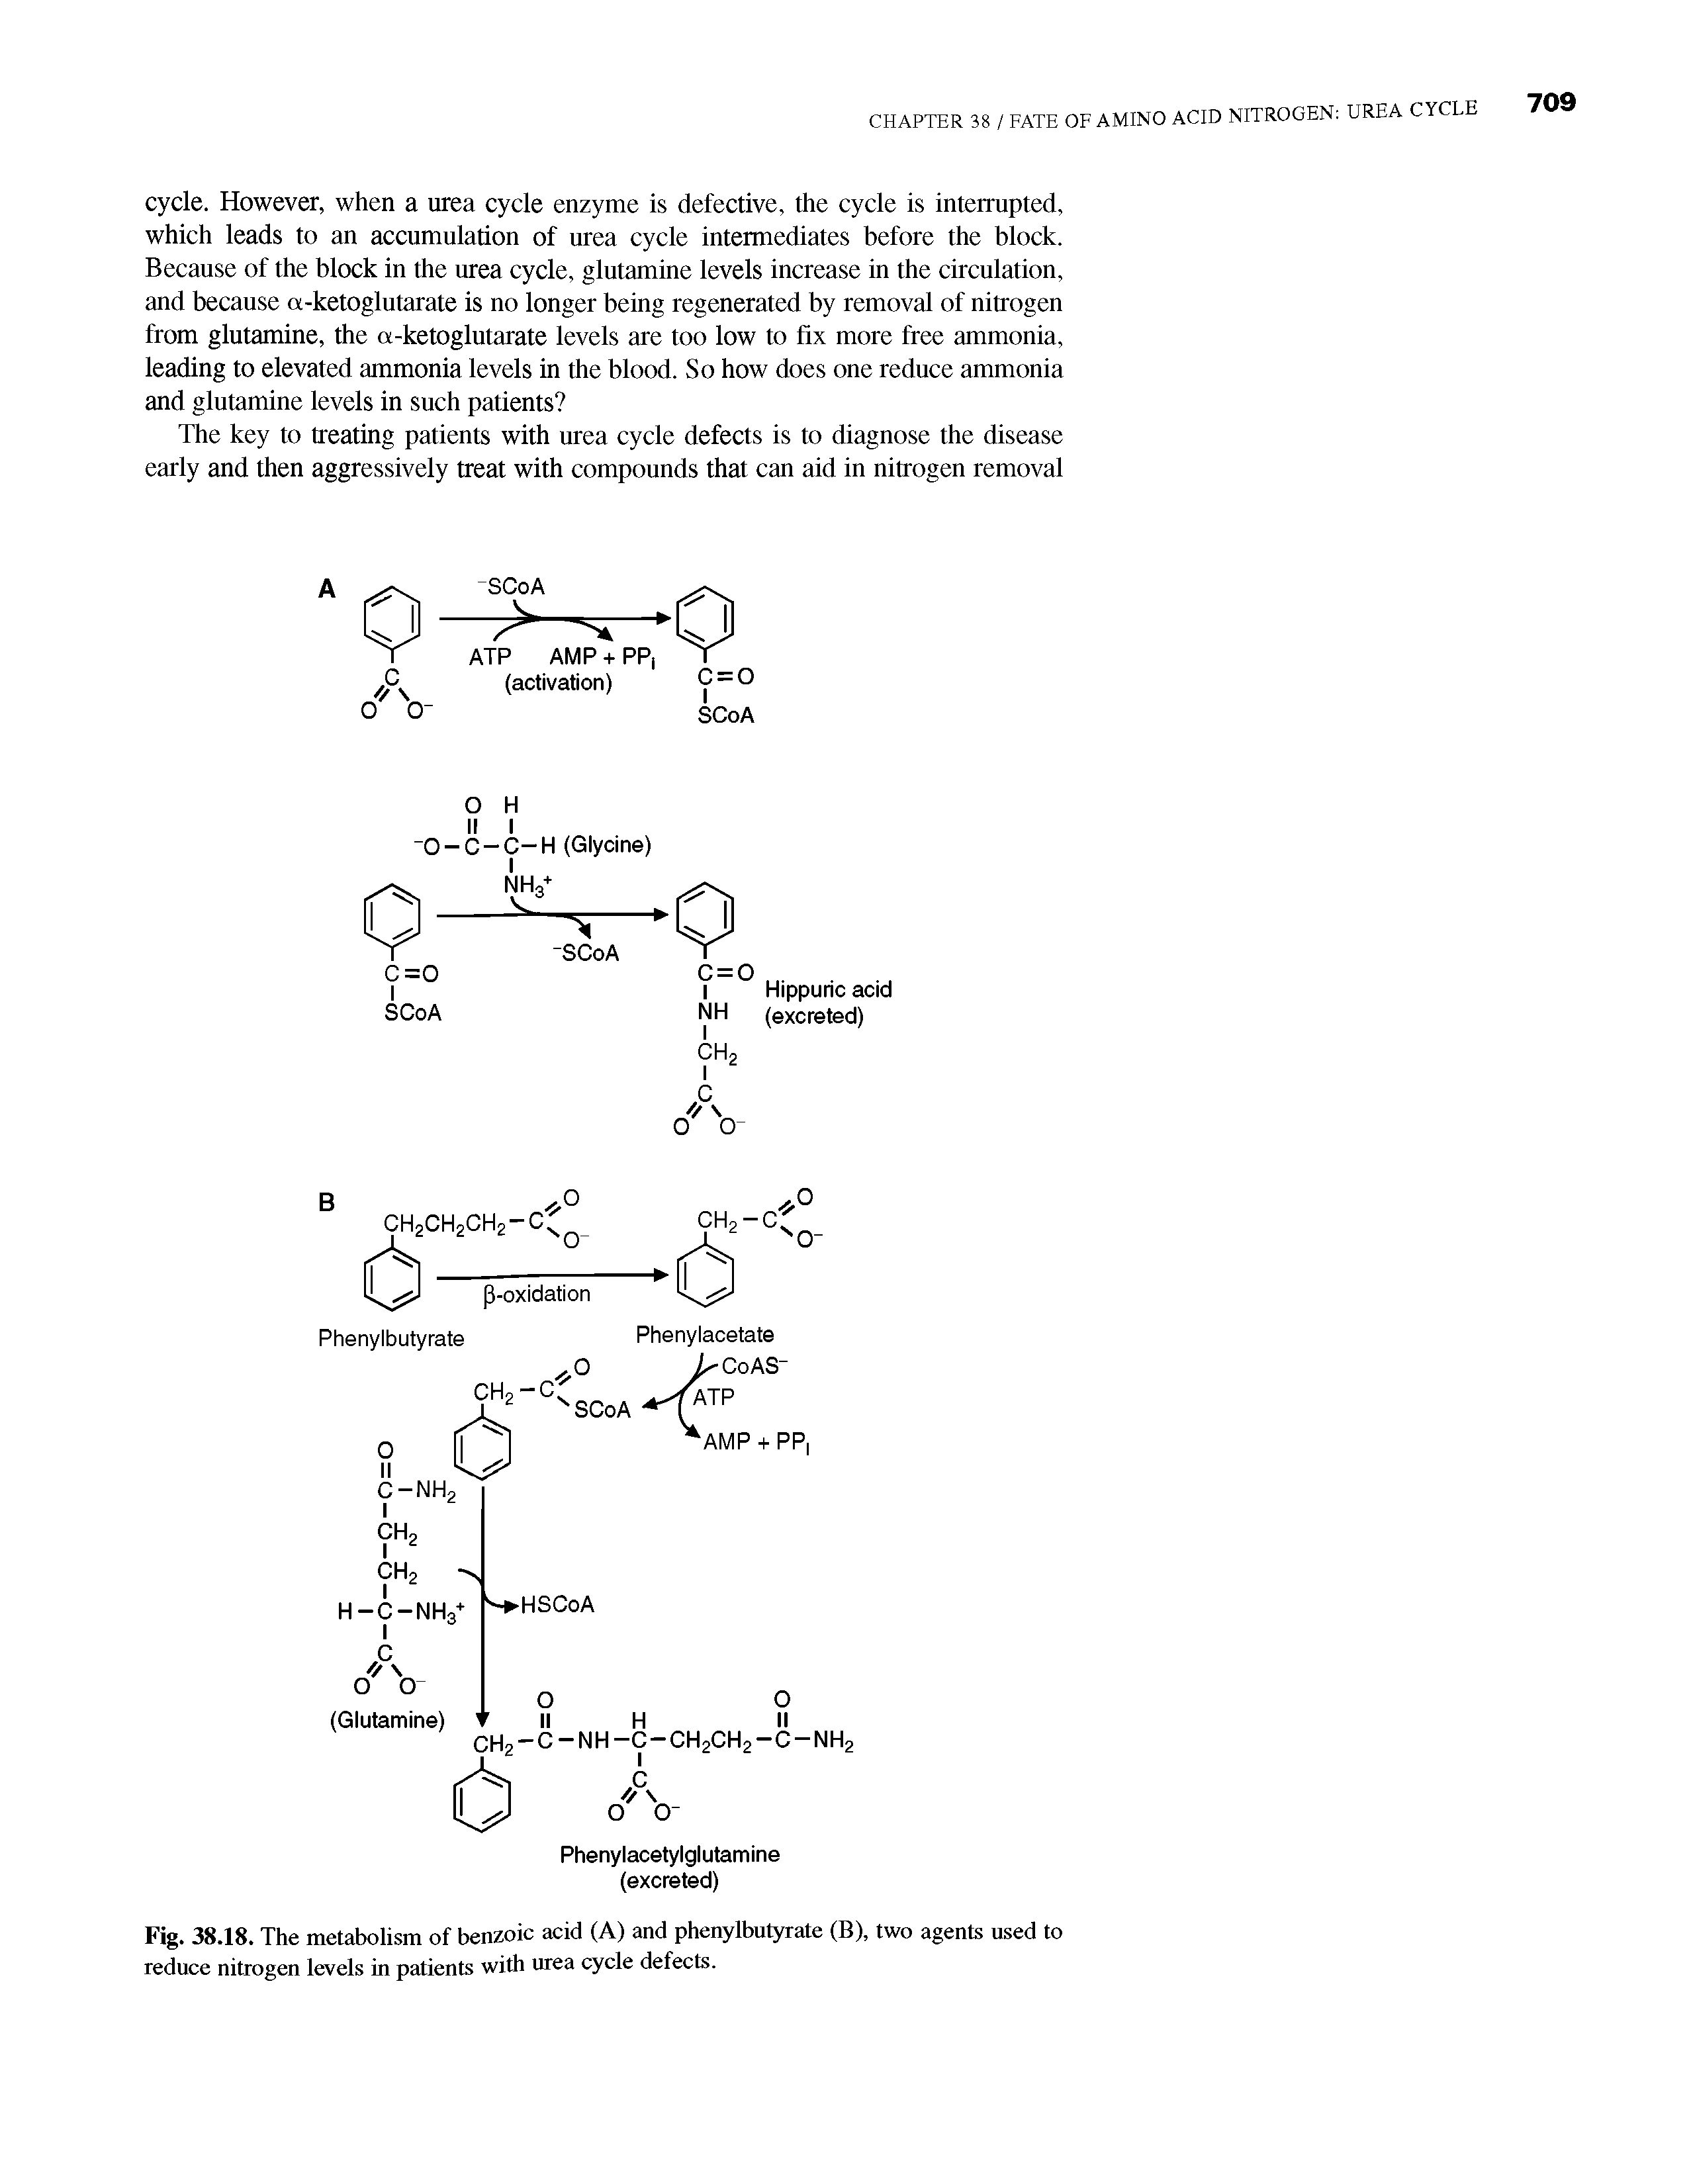 Fig. 38.18. The metabolism of benzoic acid (A) and phenylbutyrate (B), two agents used to reduce nitrogen levels in patients with urea cycle defects.